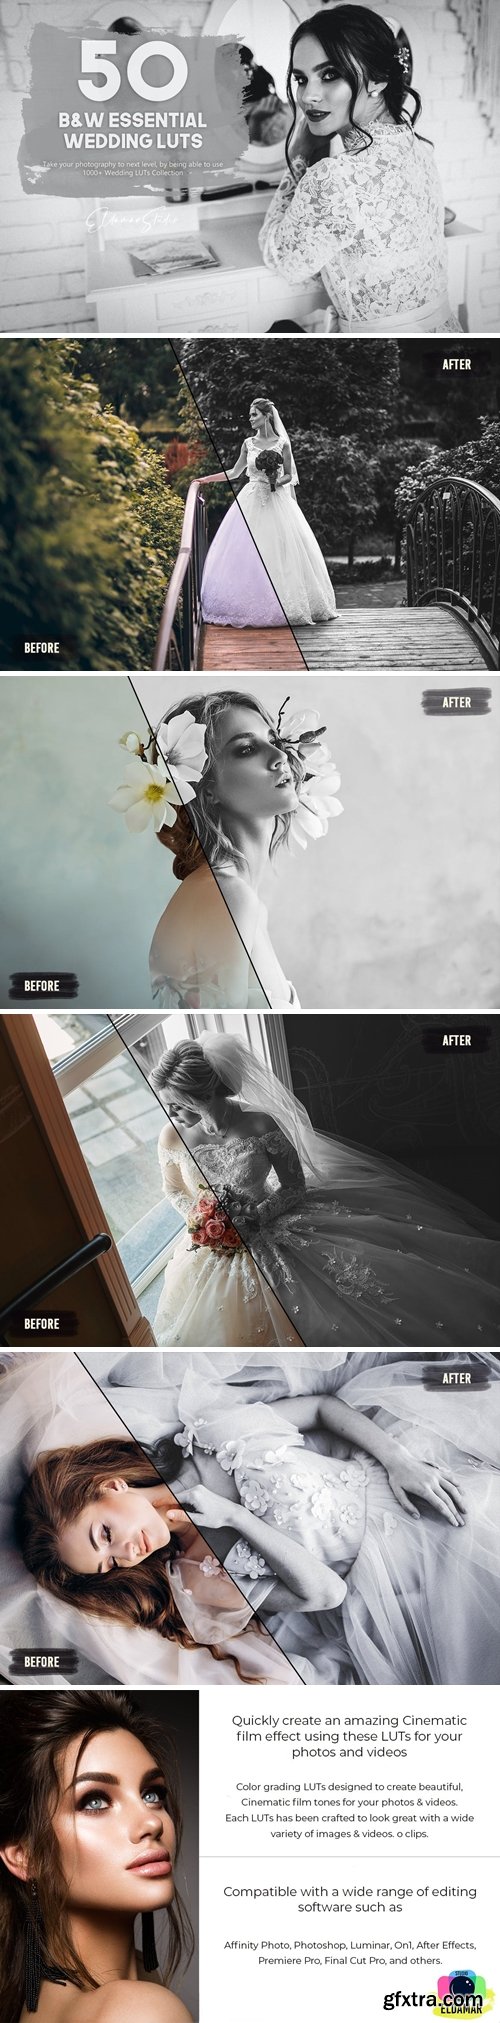 50 Black and White Essential Wedding LUTs Pack